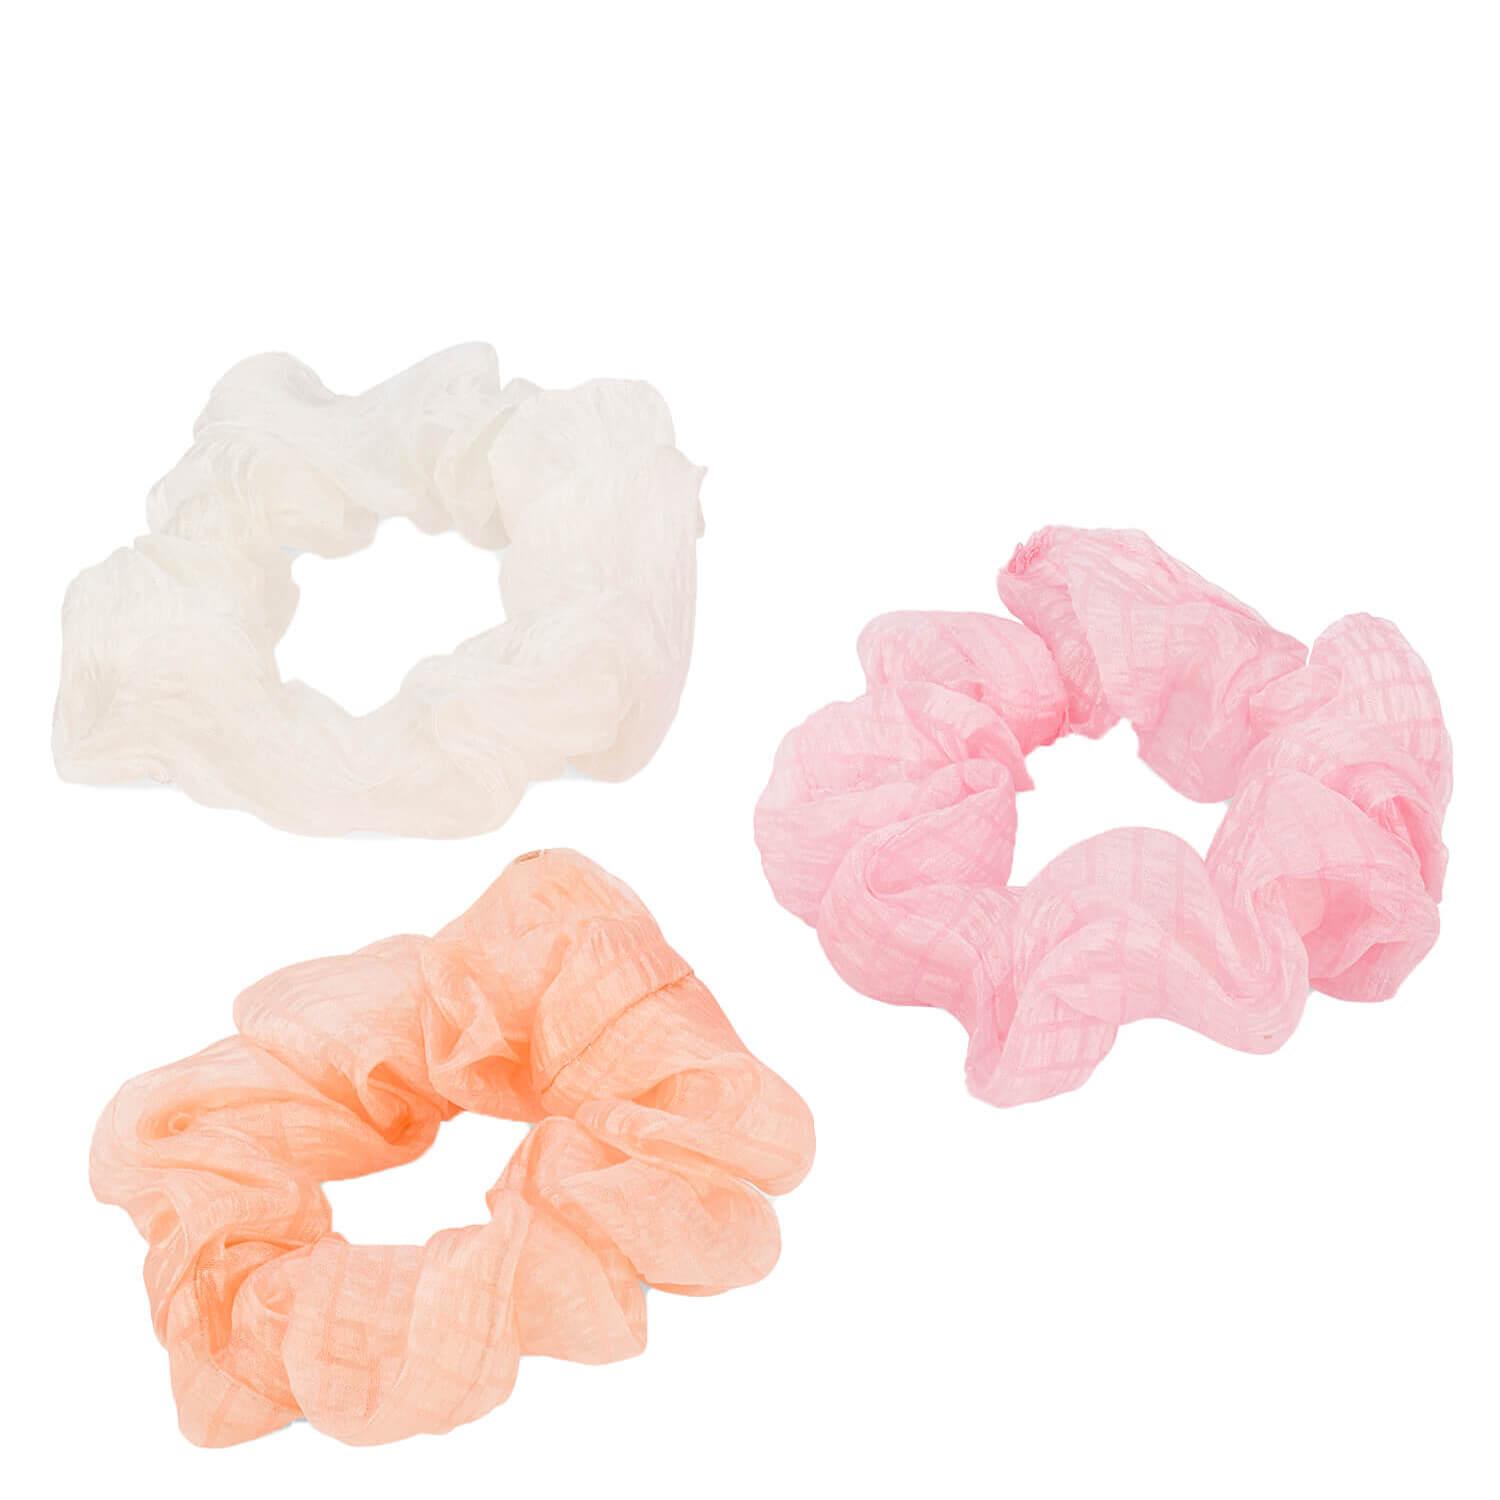 Transparentes Twisted Elastic Scrunchie, lachs, weiss & rosa